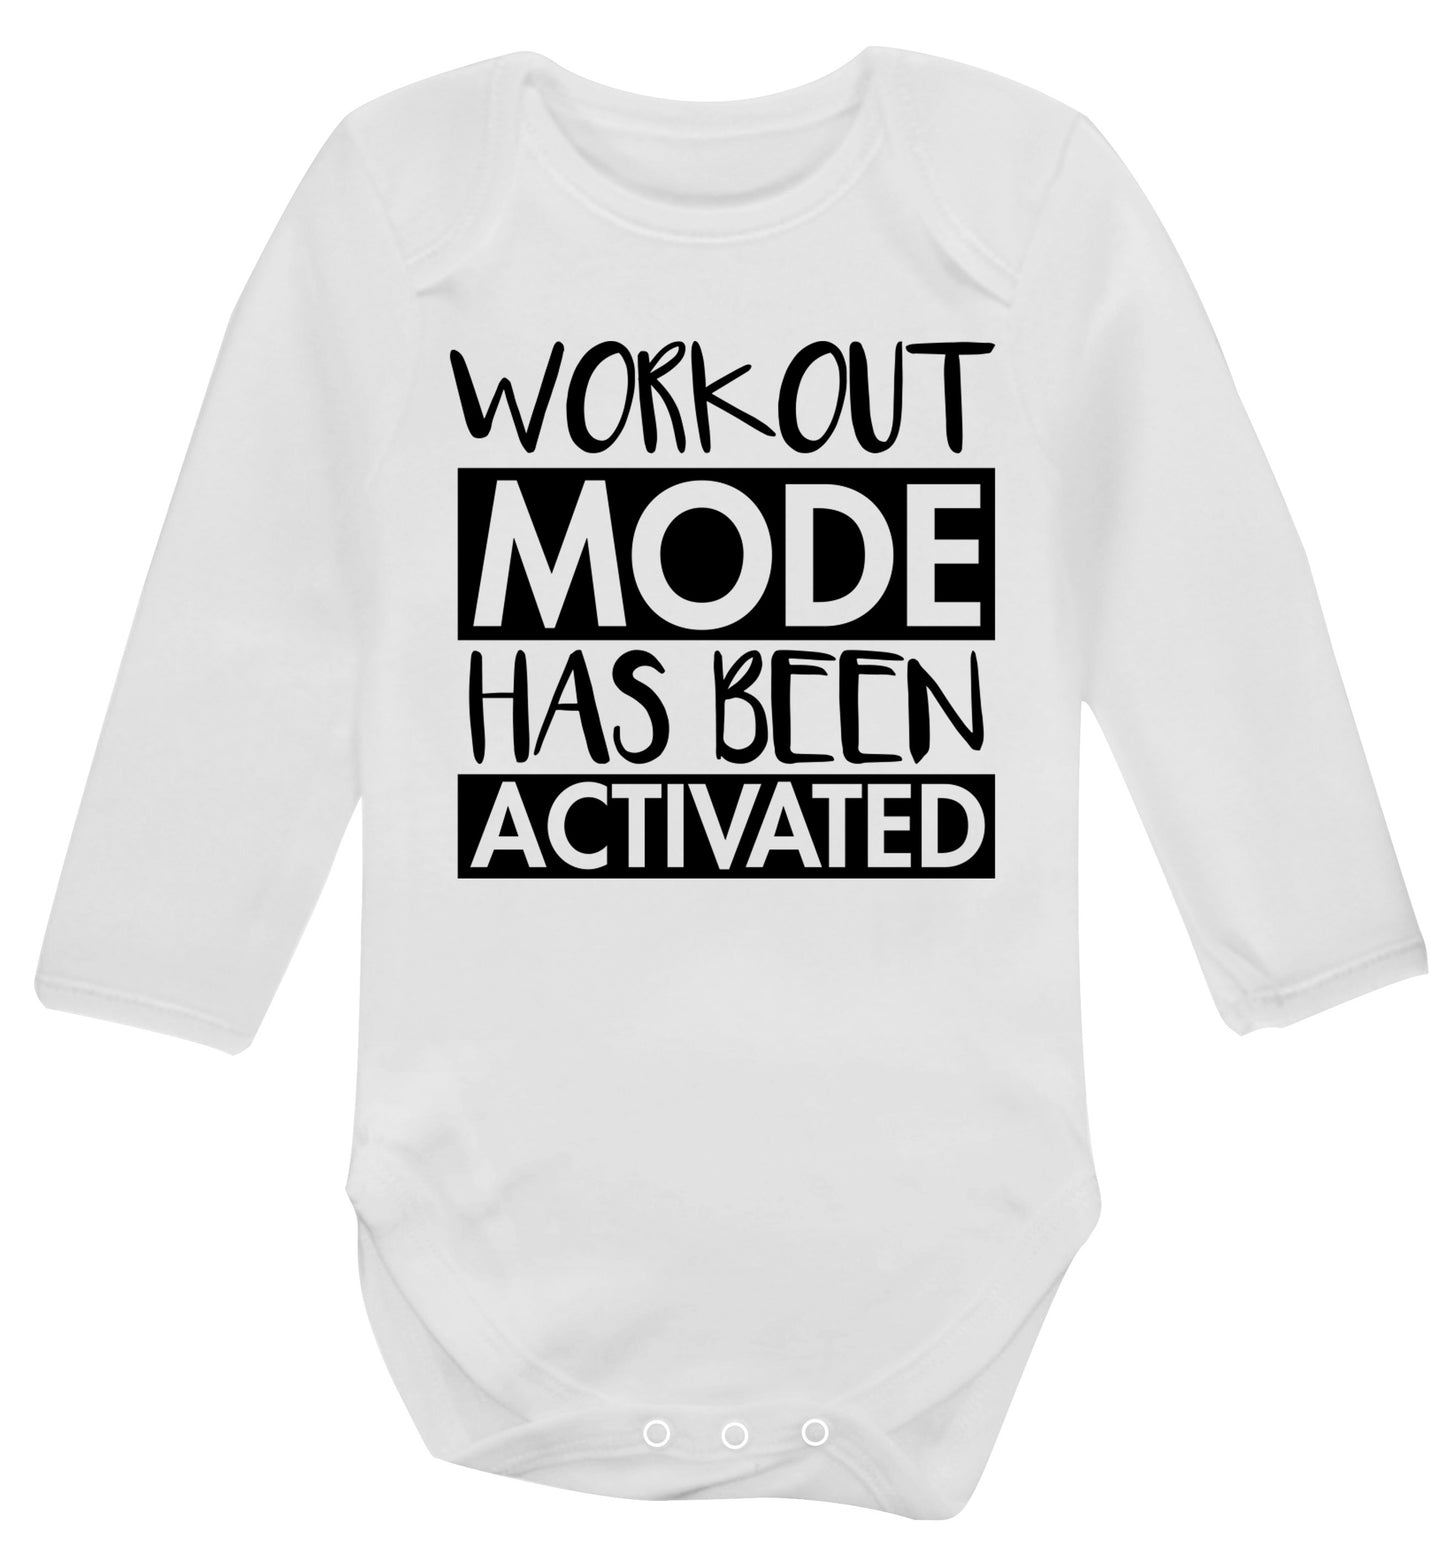 Workout mode has been activated Baby Vest long sleeved white 6-12 months